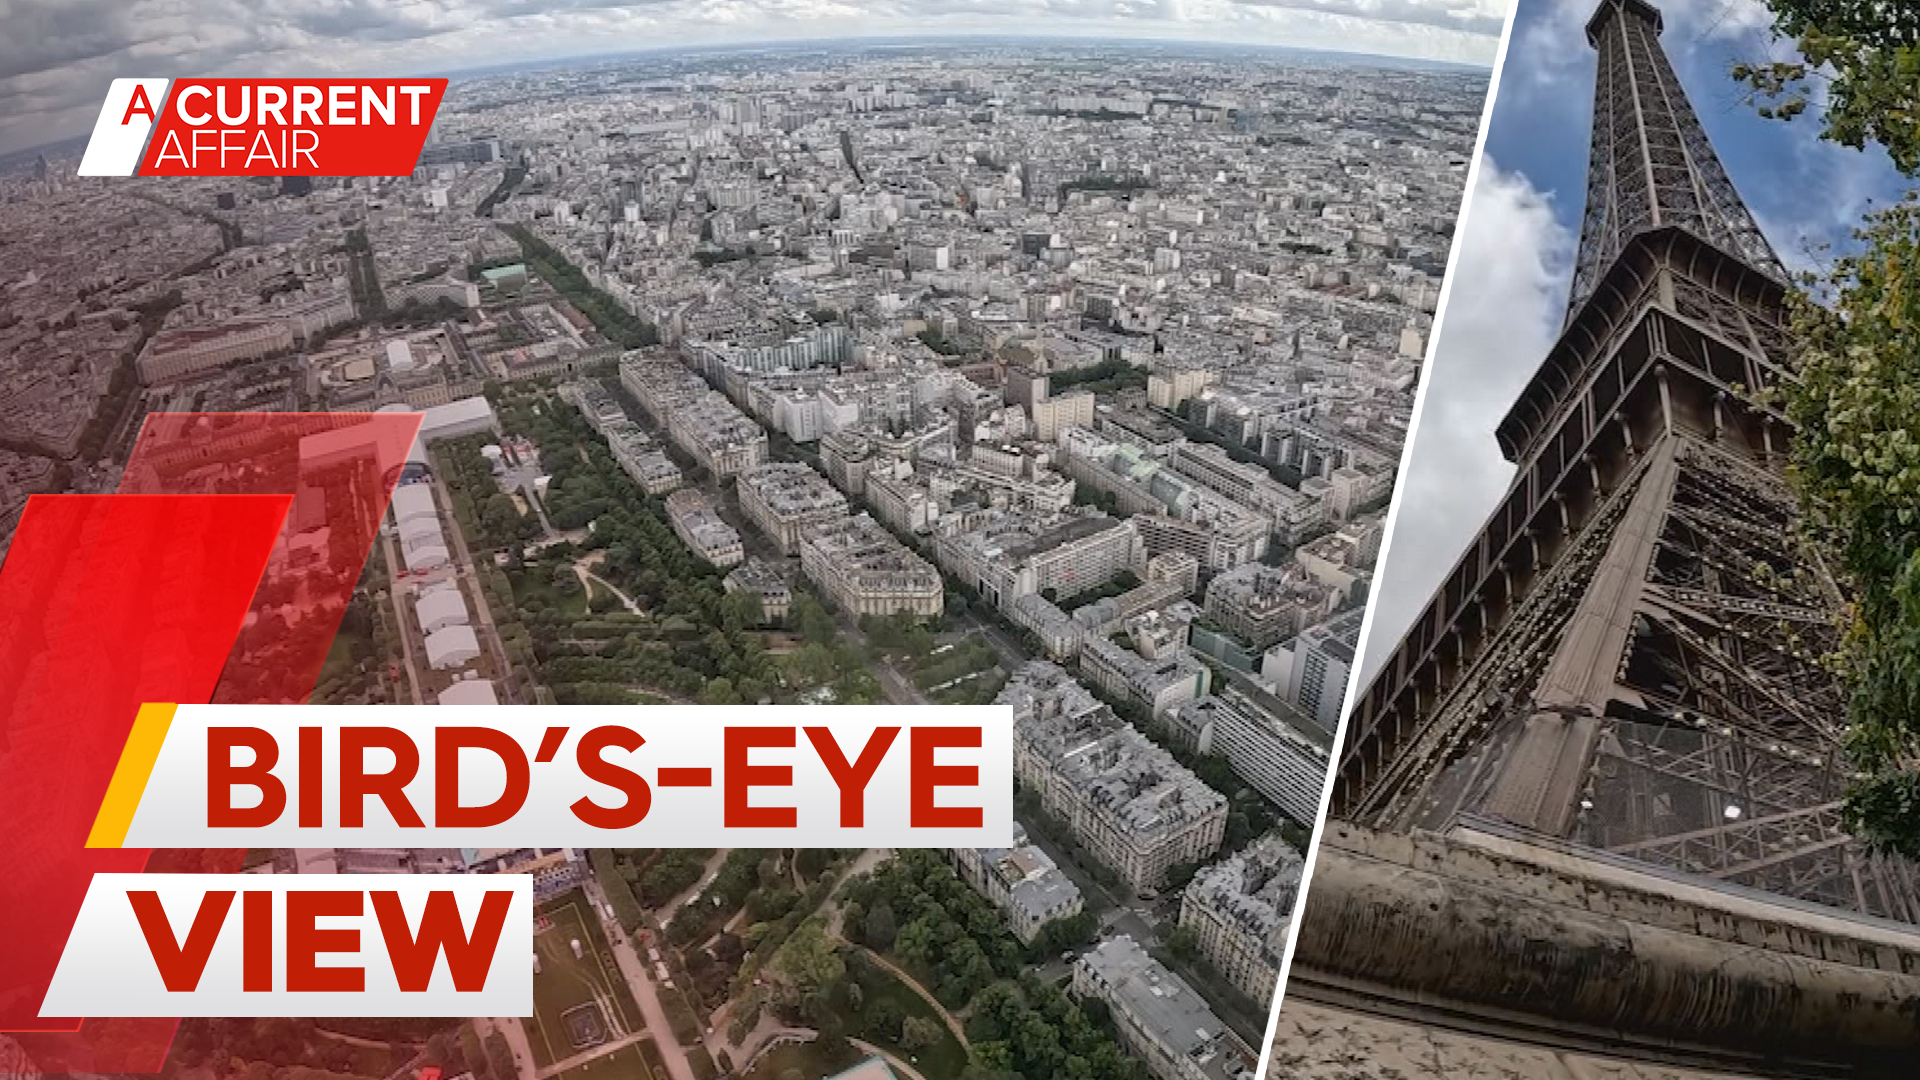 A Current Affair gets a view of The Olympics from the top of the Eiffel Tower